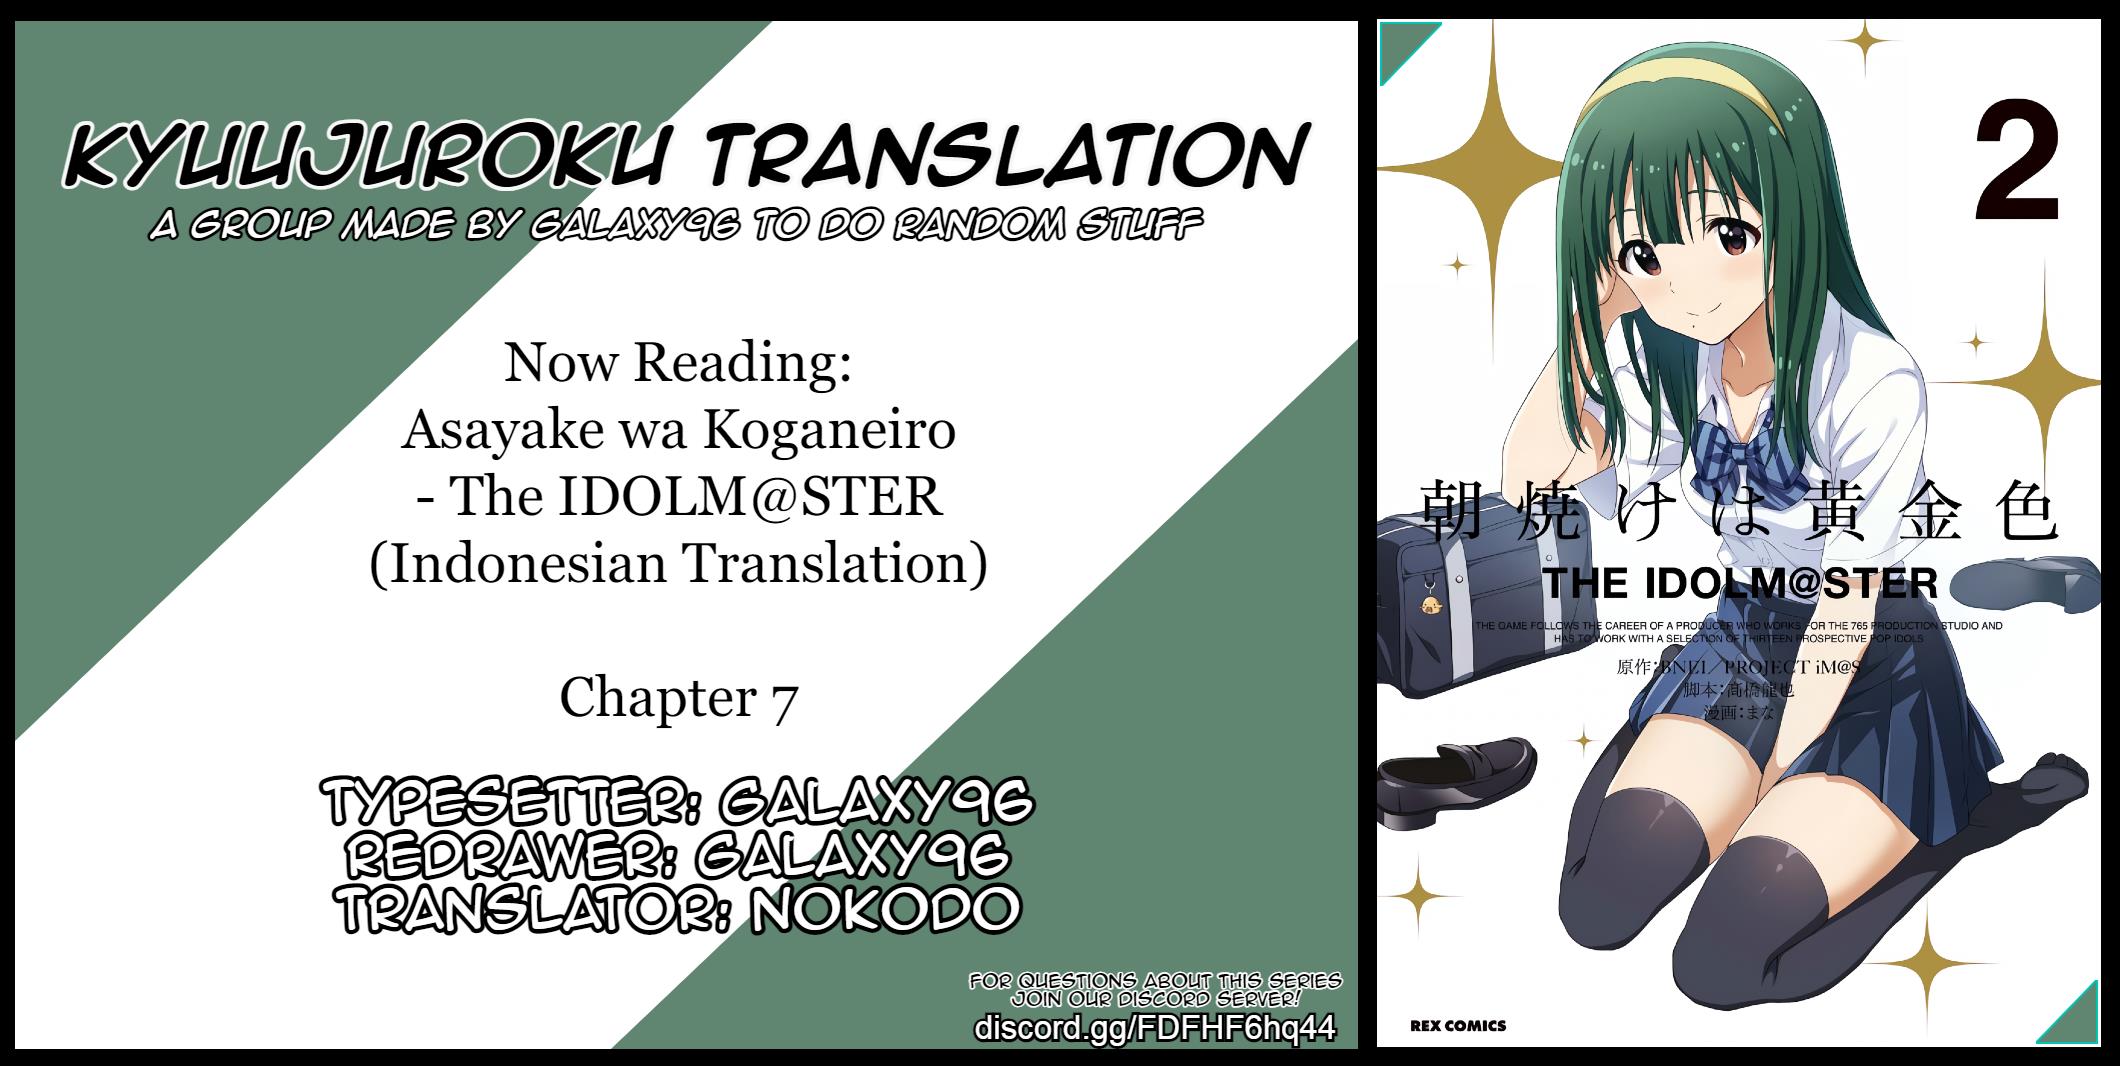 Morning Glow is Golden: The IDOLM@STER Chapter 7